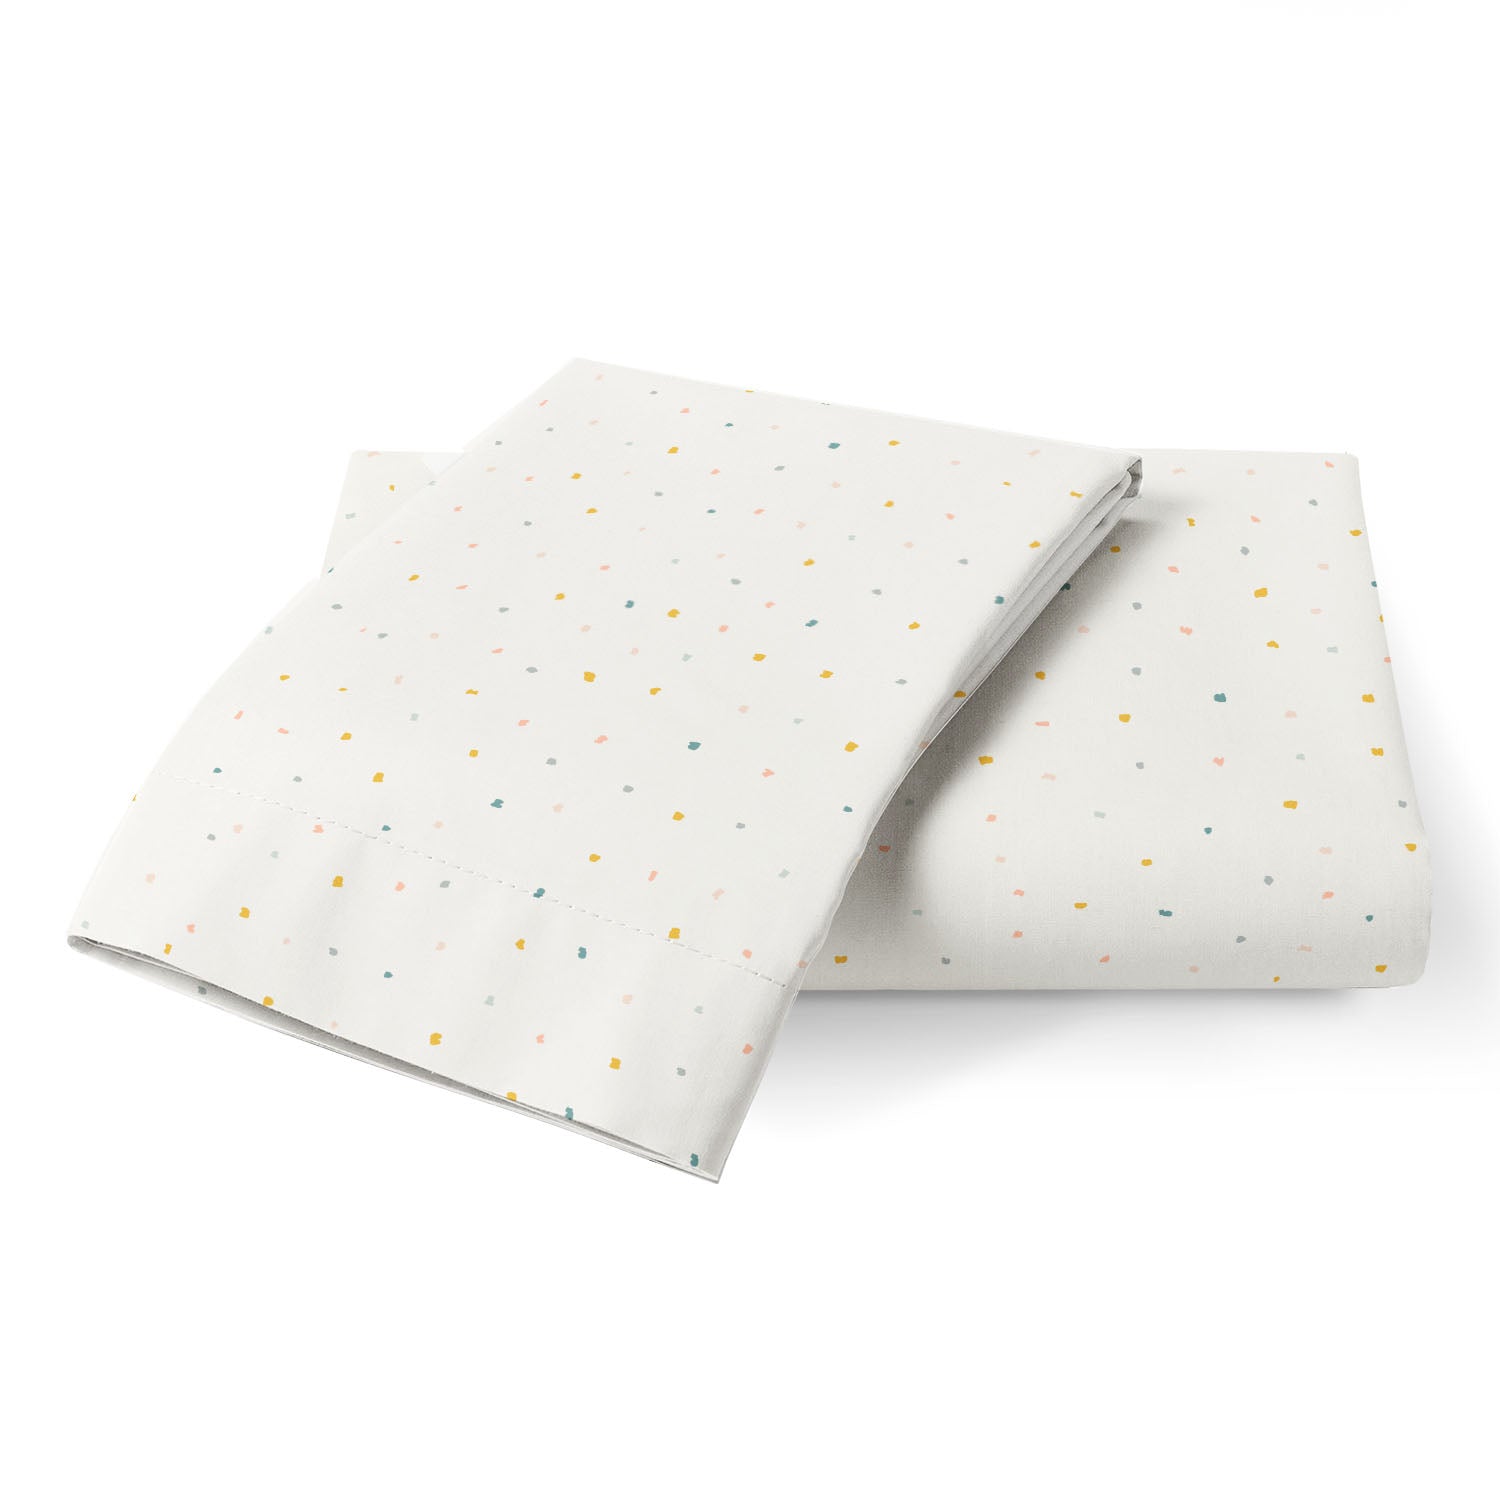 Two folded white Makemake Organics handkerchiefs with multicolored polka dots displayed on a white background.